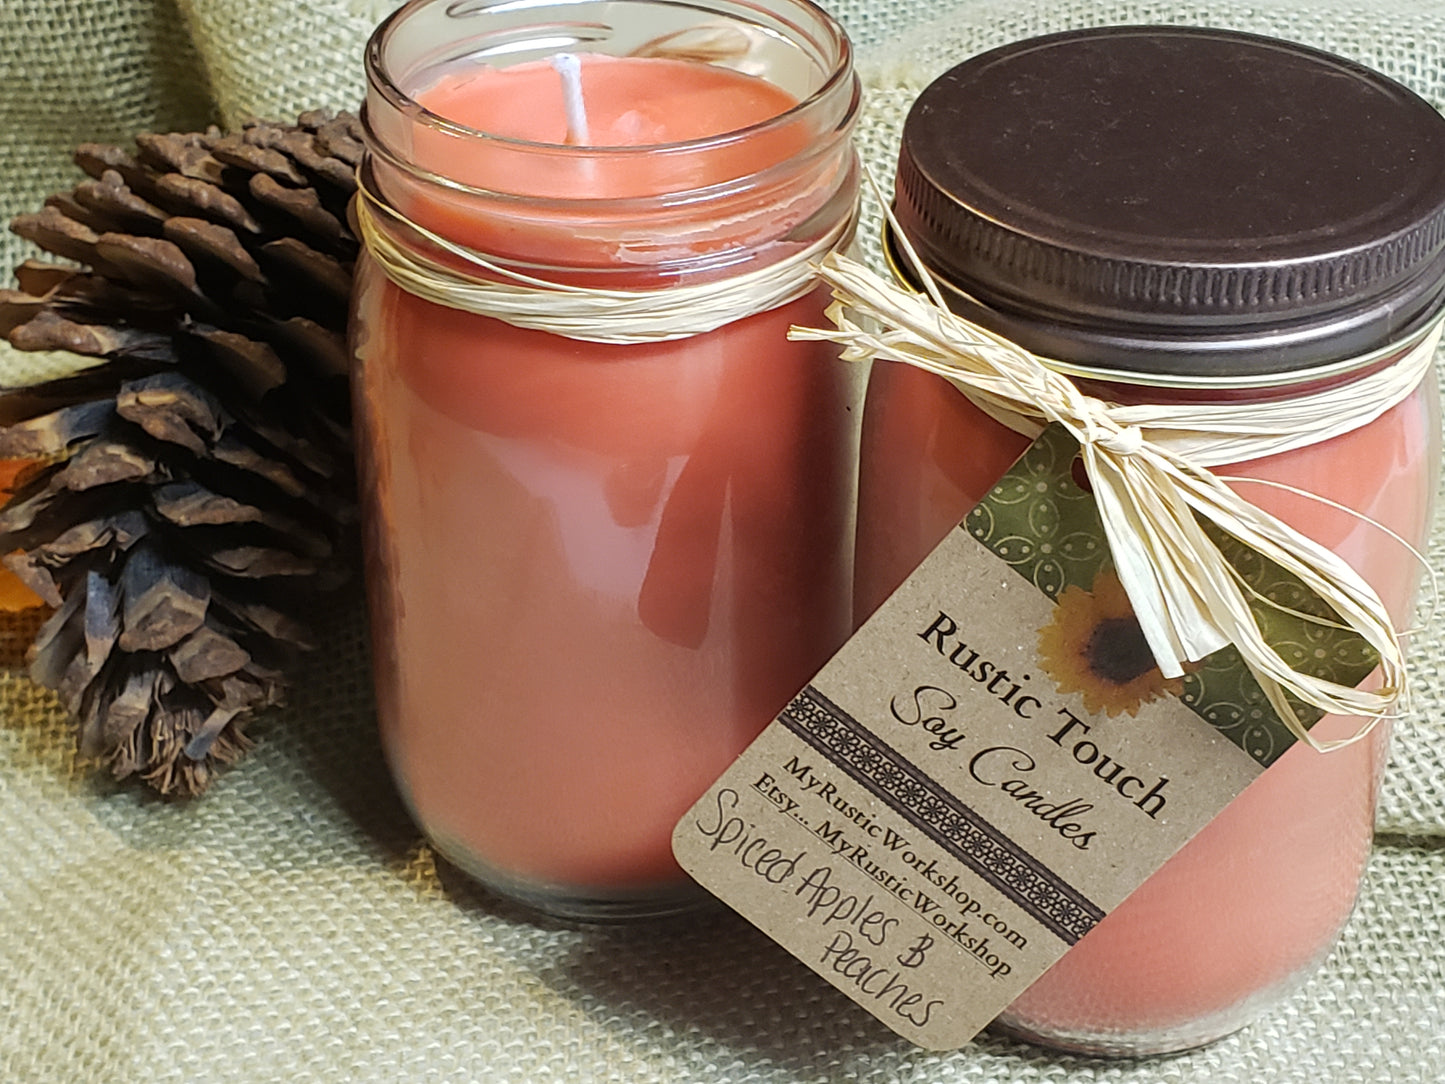 Spiced Apples & Peaches Soy Candle